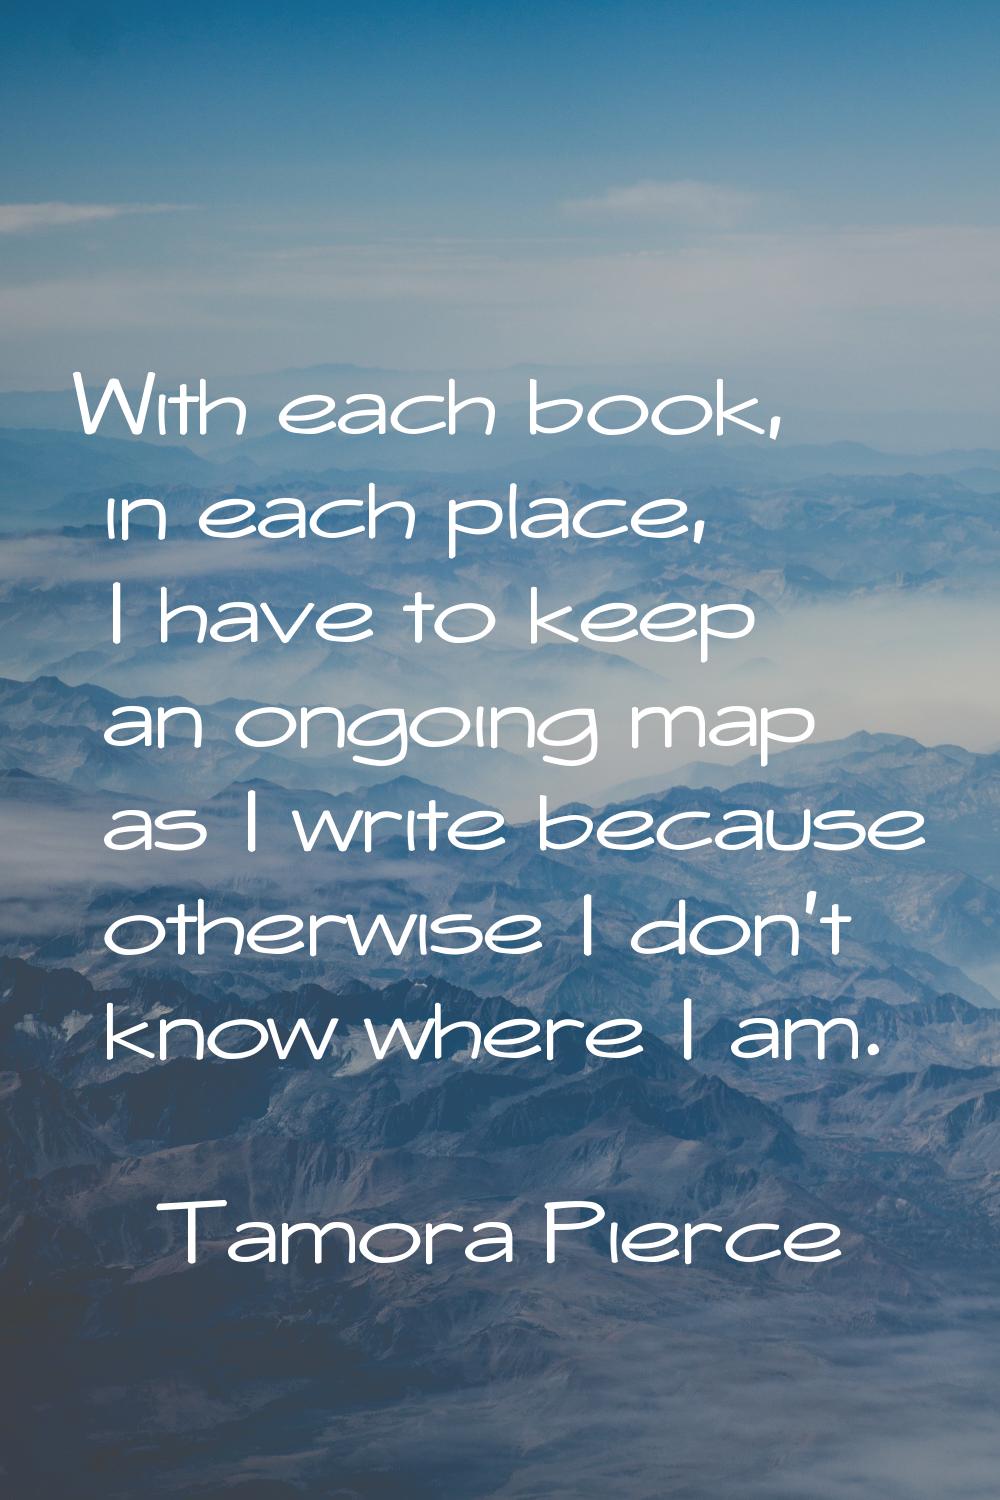 With each book, in each place, I have to keep an ongoing map as I write because otherwise I don't k